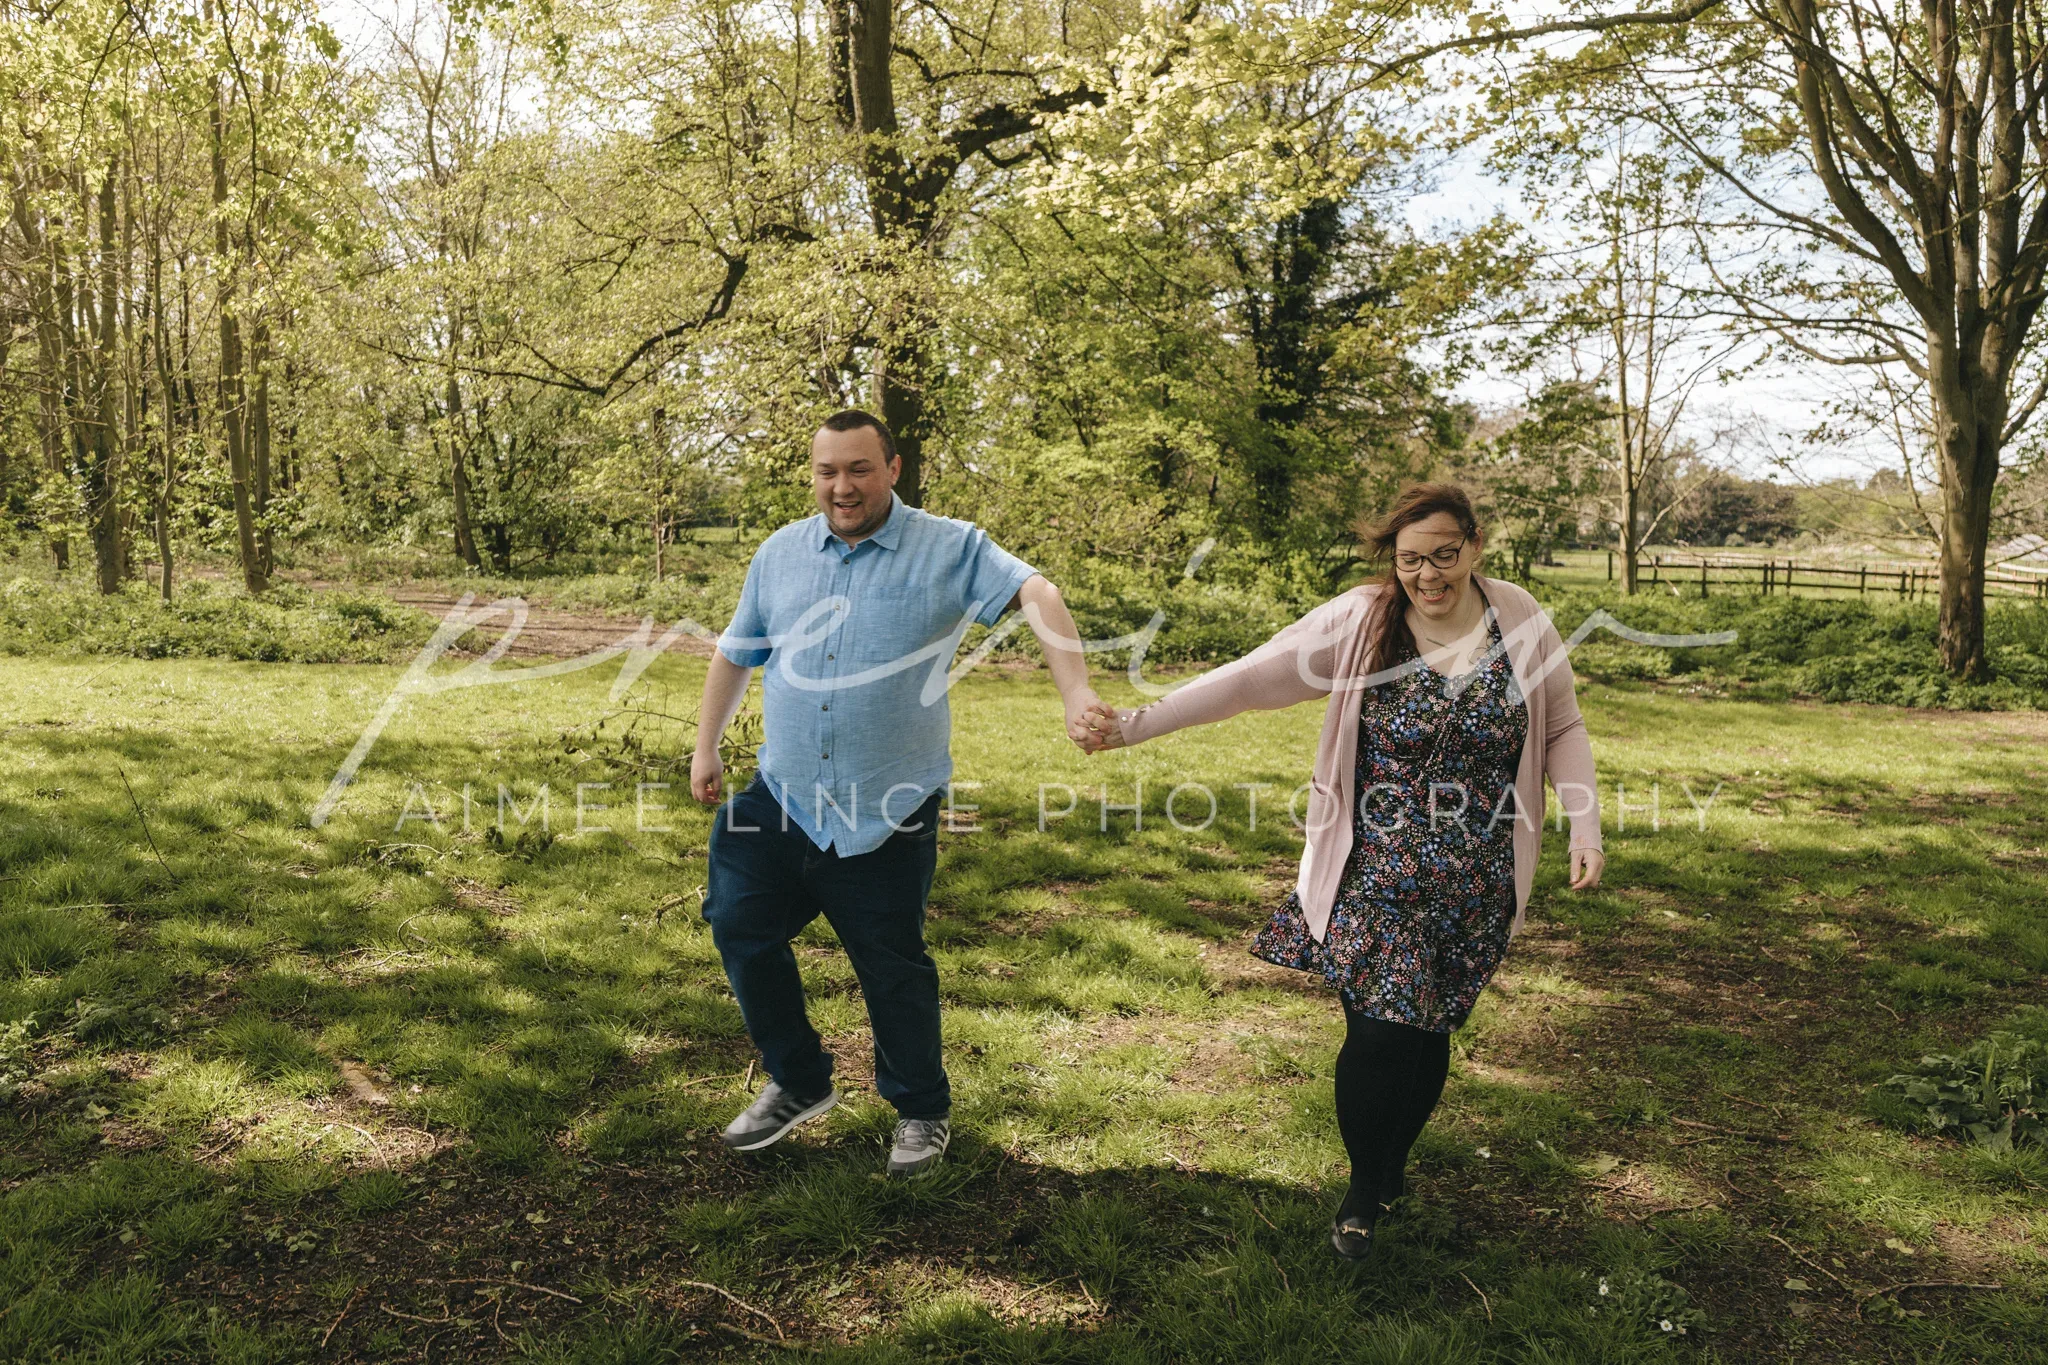 A joyful couple holding hands and running through a lush, green park, with blossoming trees and vibrant grass under a clear sky. Samantha is dressed in a blue shirt and jeans, while Ashley wears a